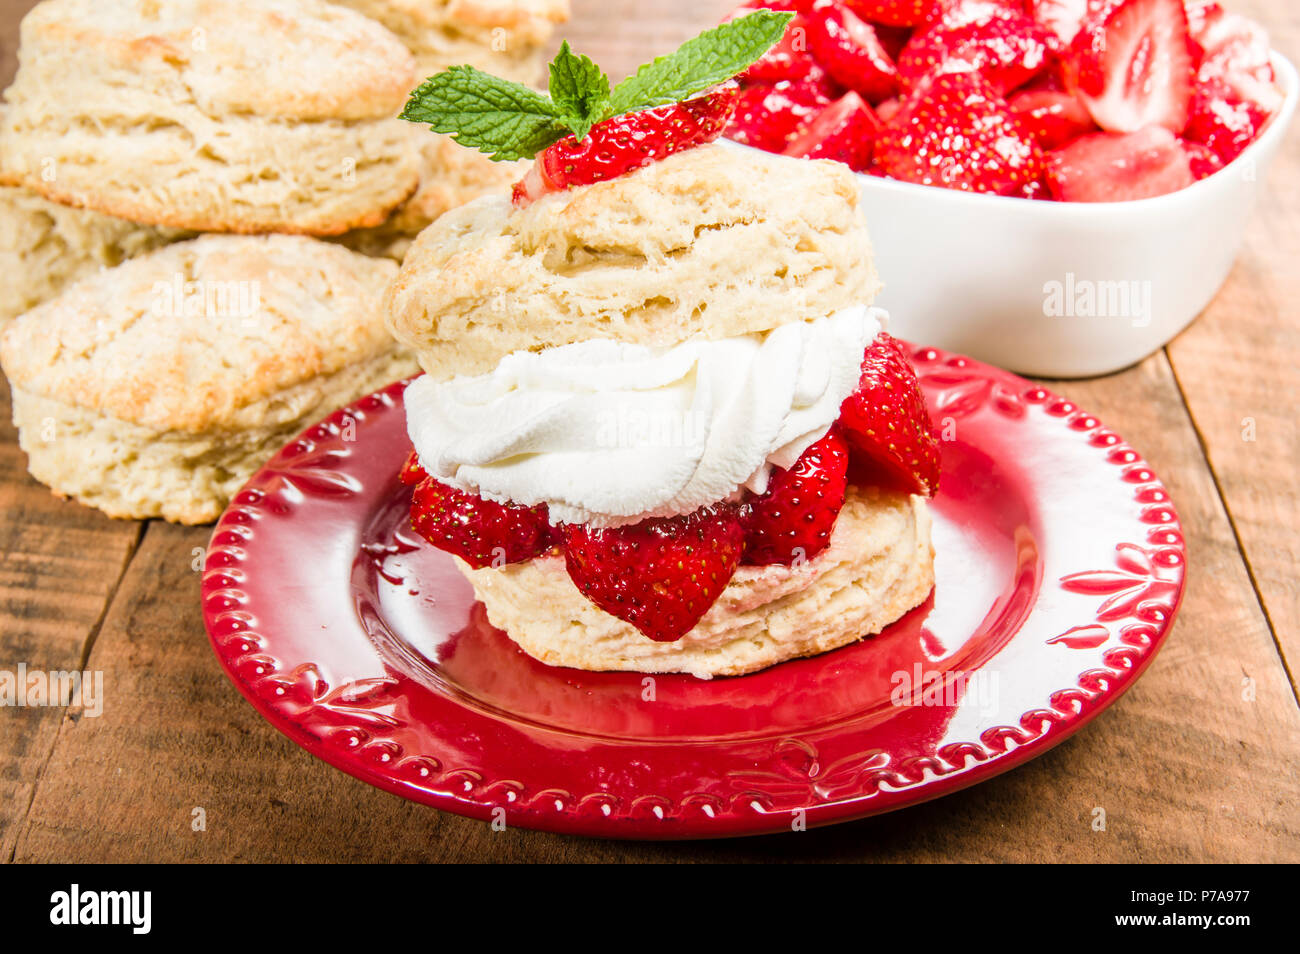 Strawberries and fresh whipped cream on baked biscuit Stock Photo